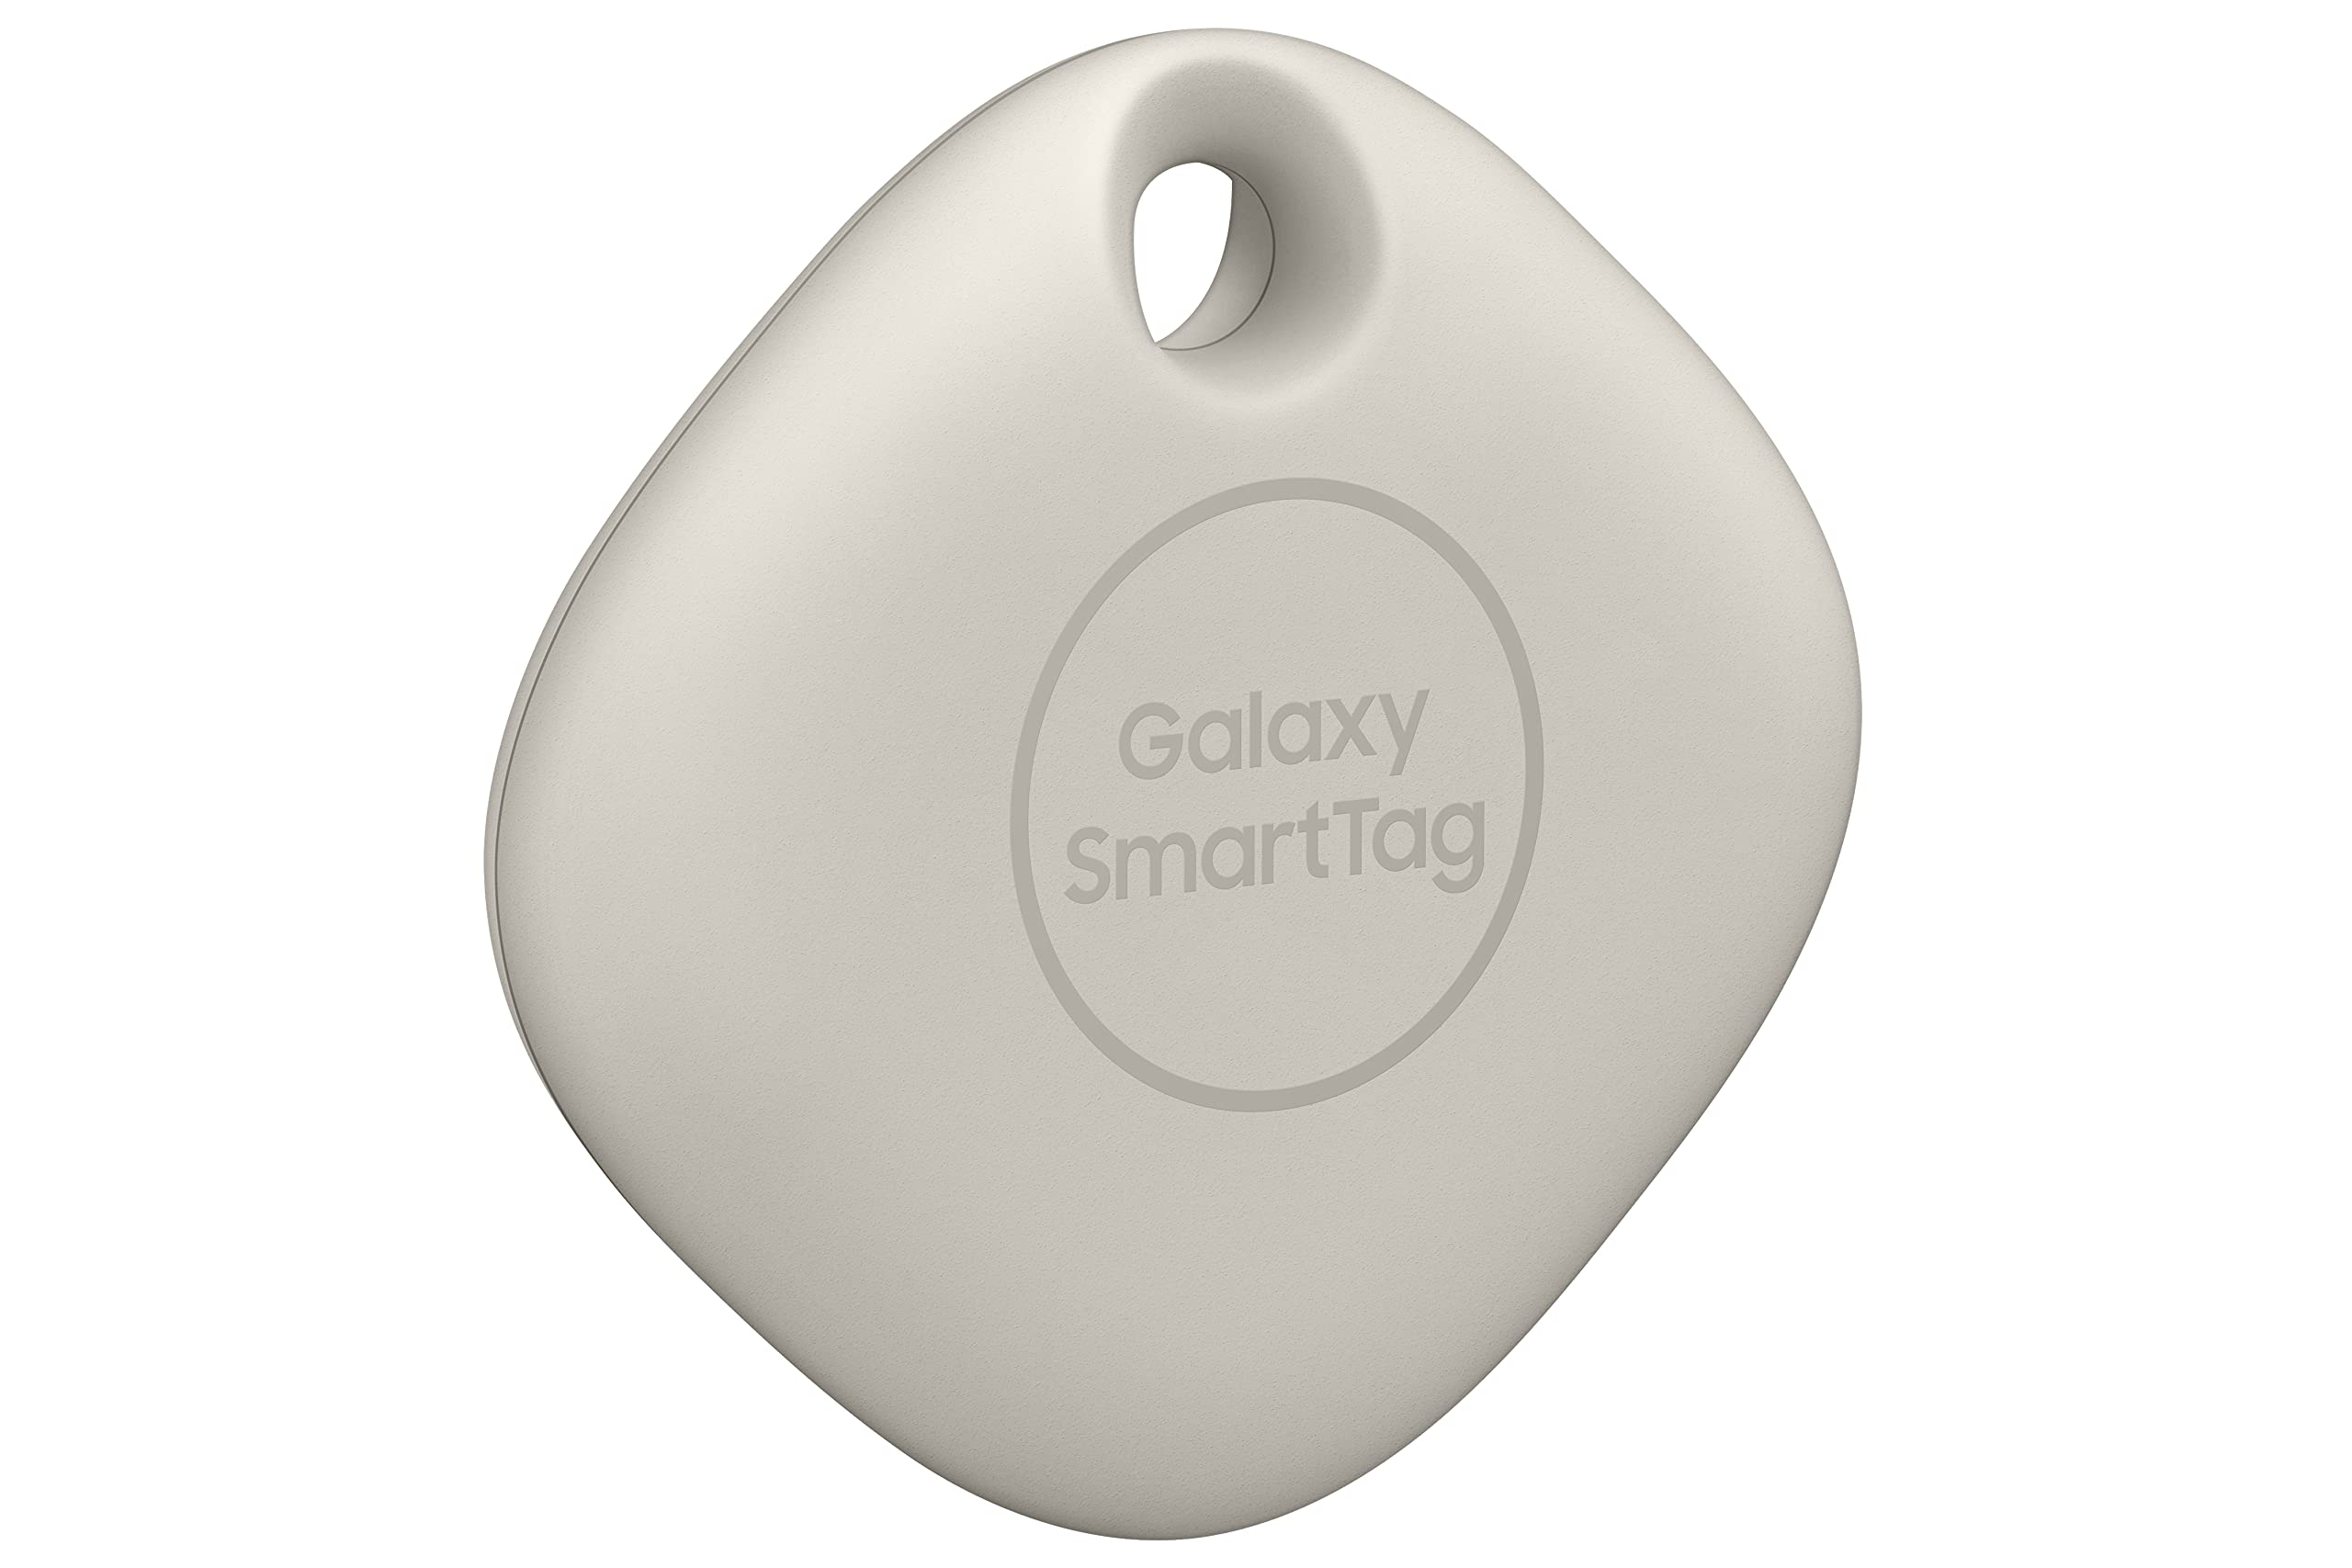 Samsung Galaxy SmartTag EI-T5300 Bluetooth Tracker & Item Locator for Keys, Wallets, Luggage and More, Oatmeal